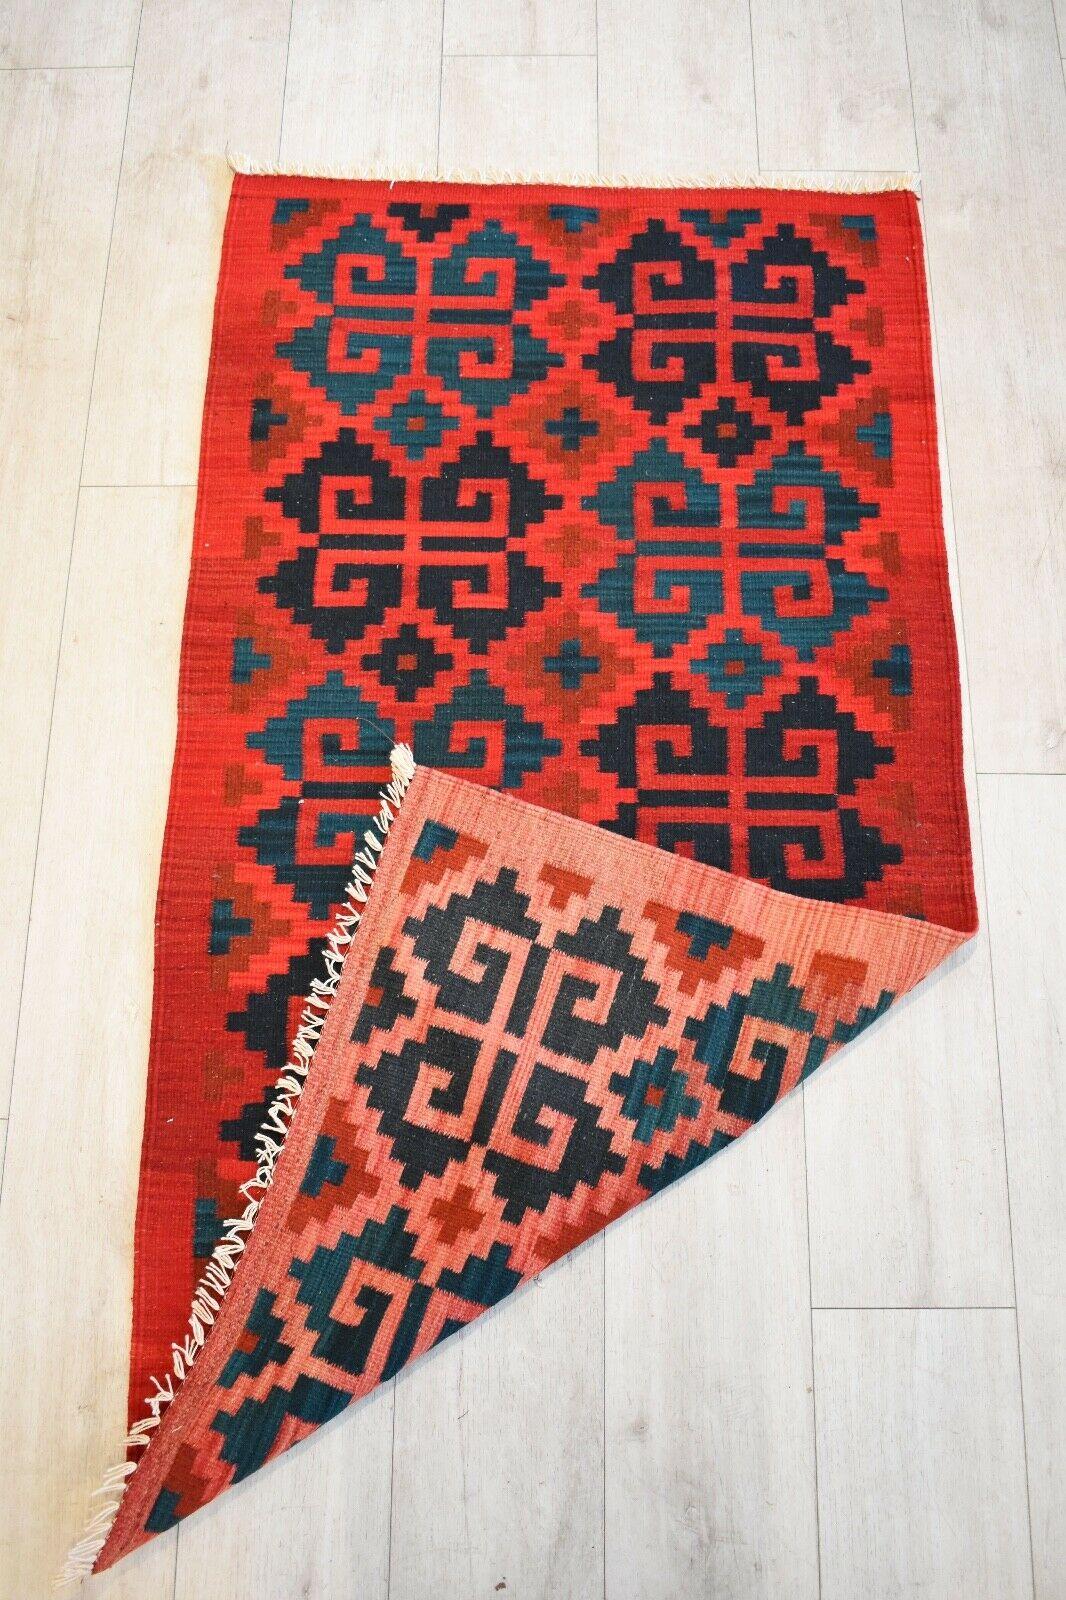 Beautiful handwoven vintage Kilim runner with geometric pattern
Naturally dyed wool in shades of red, black and navy.